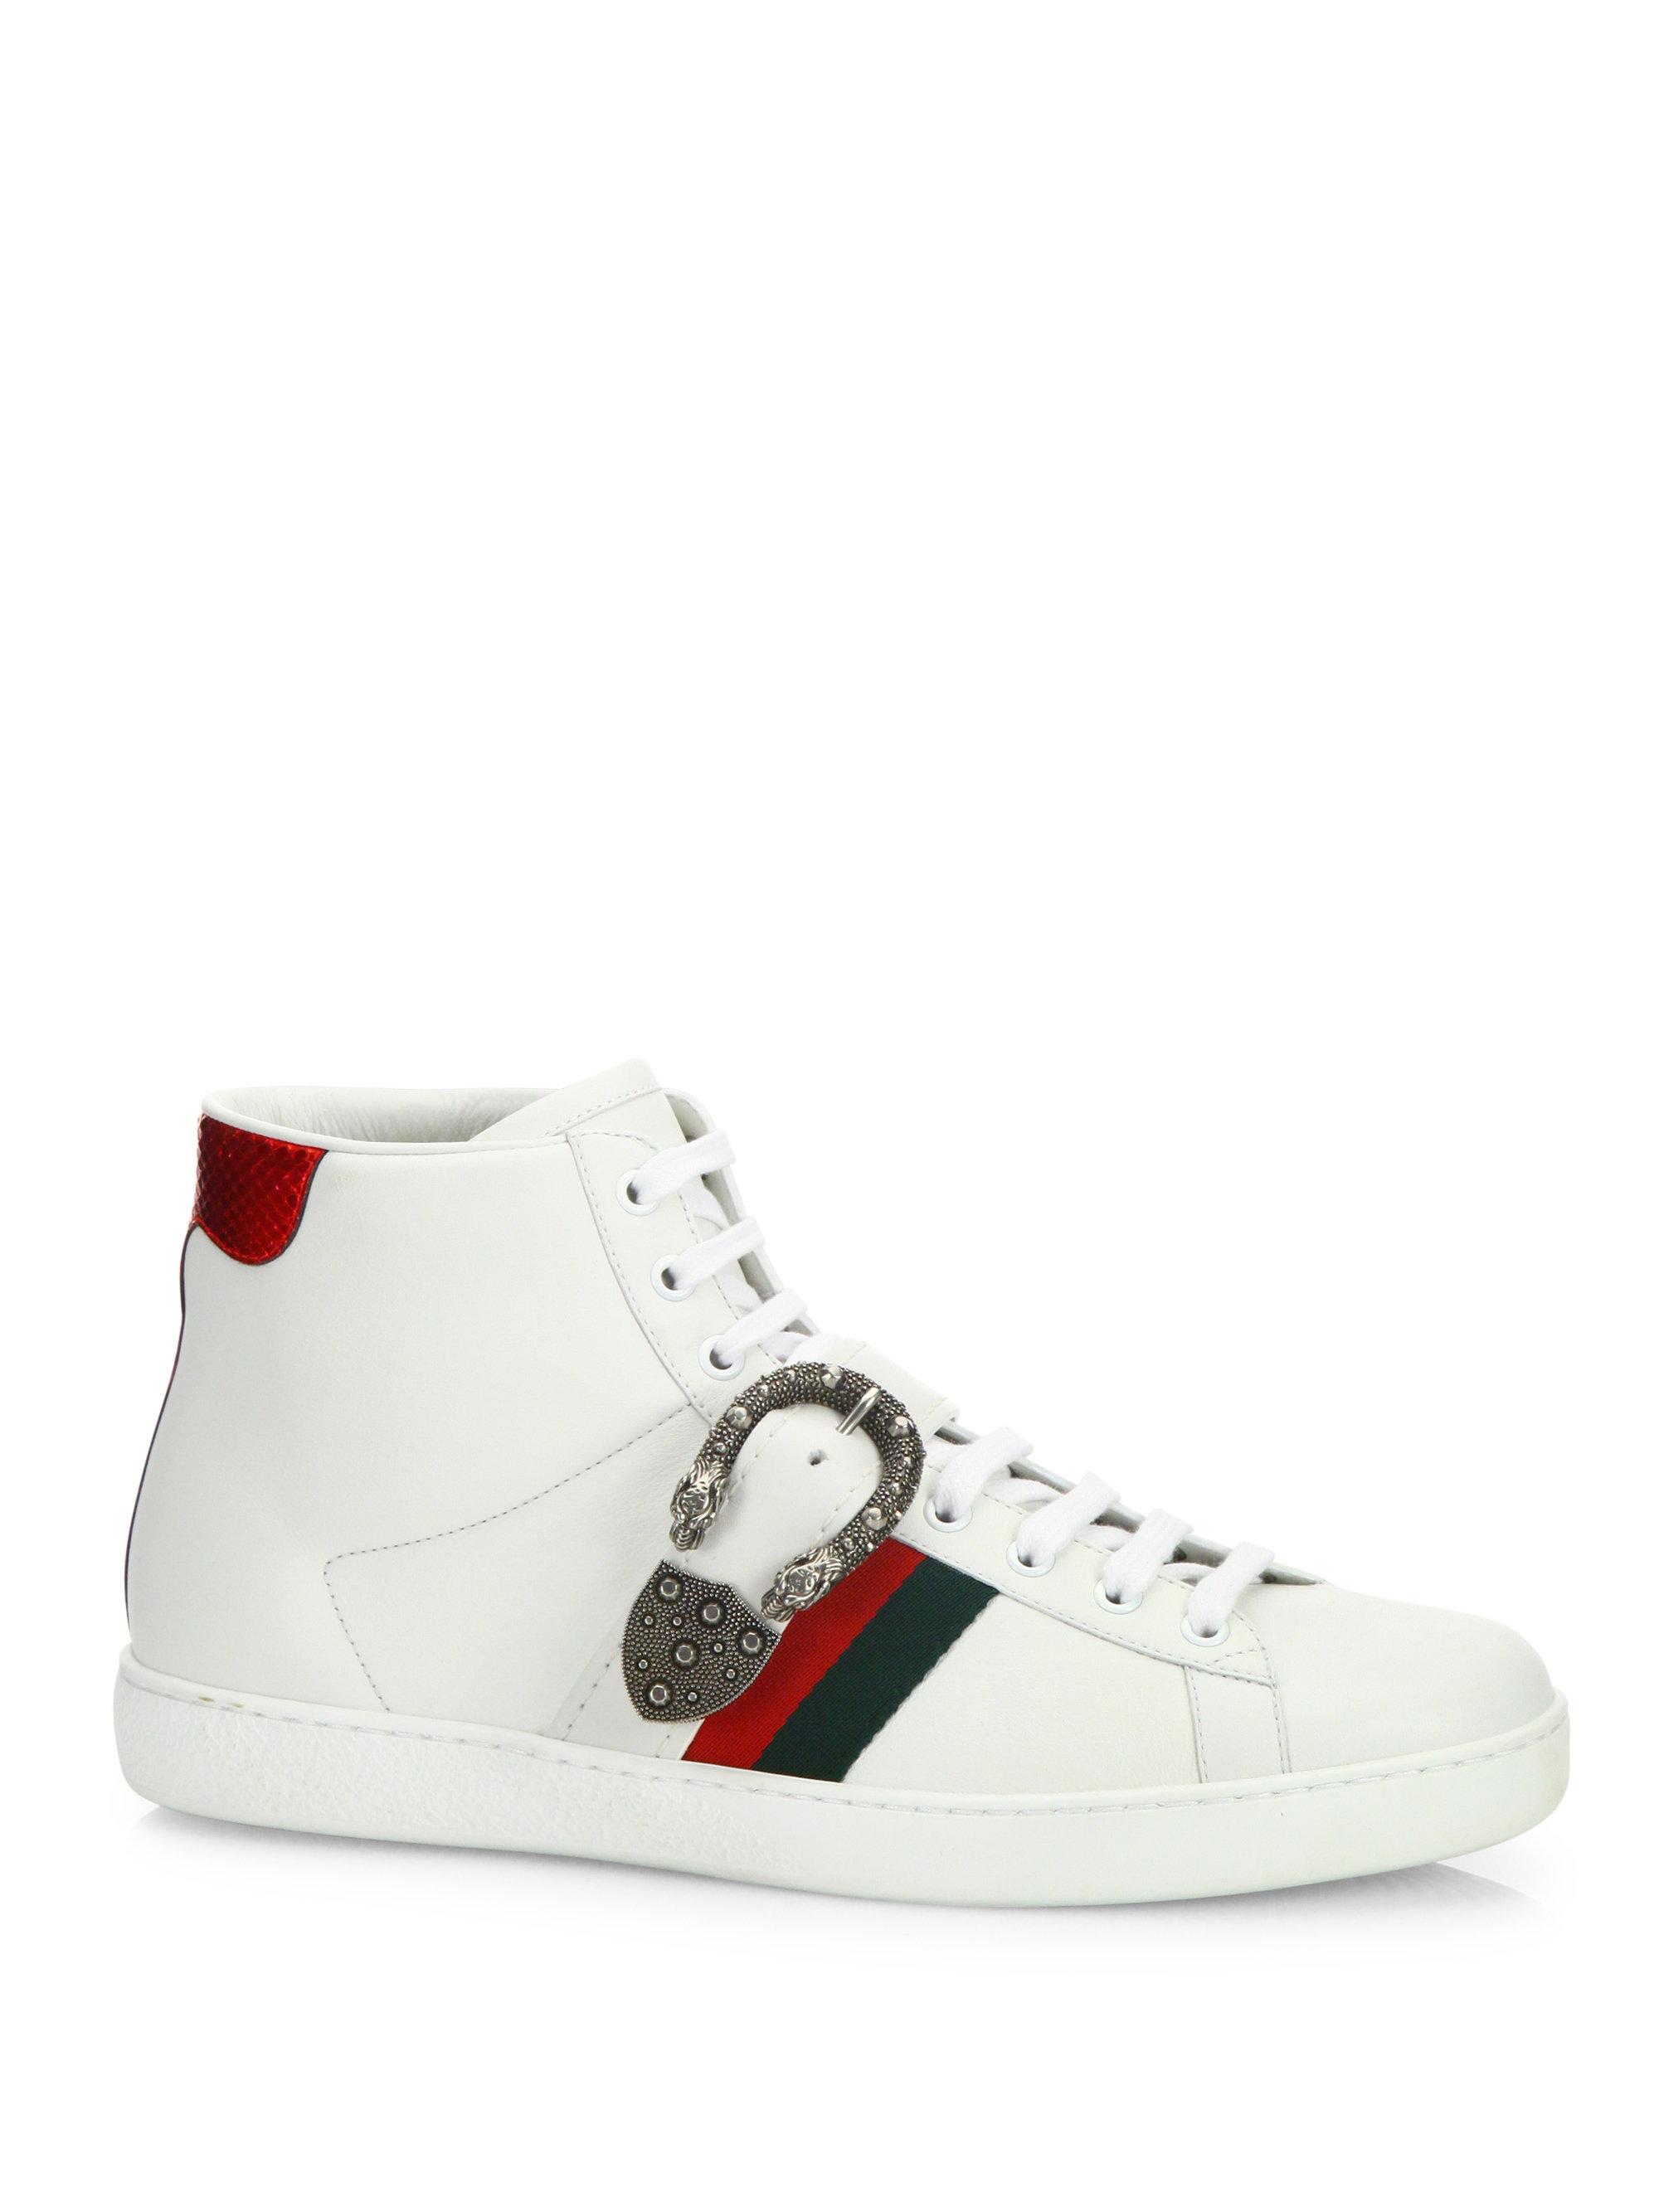 Lyst - Gucci New Ace Belt Leather High-top Sneakers in White for Men